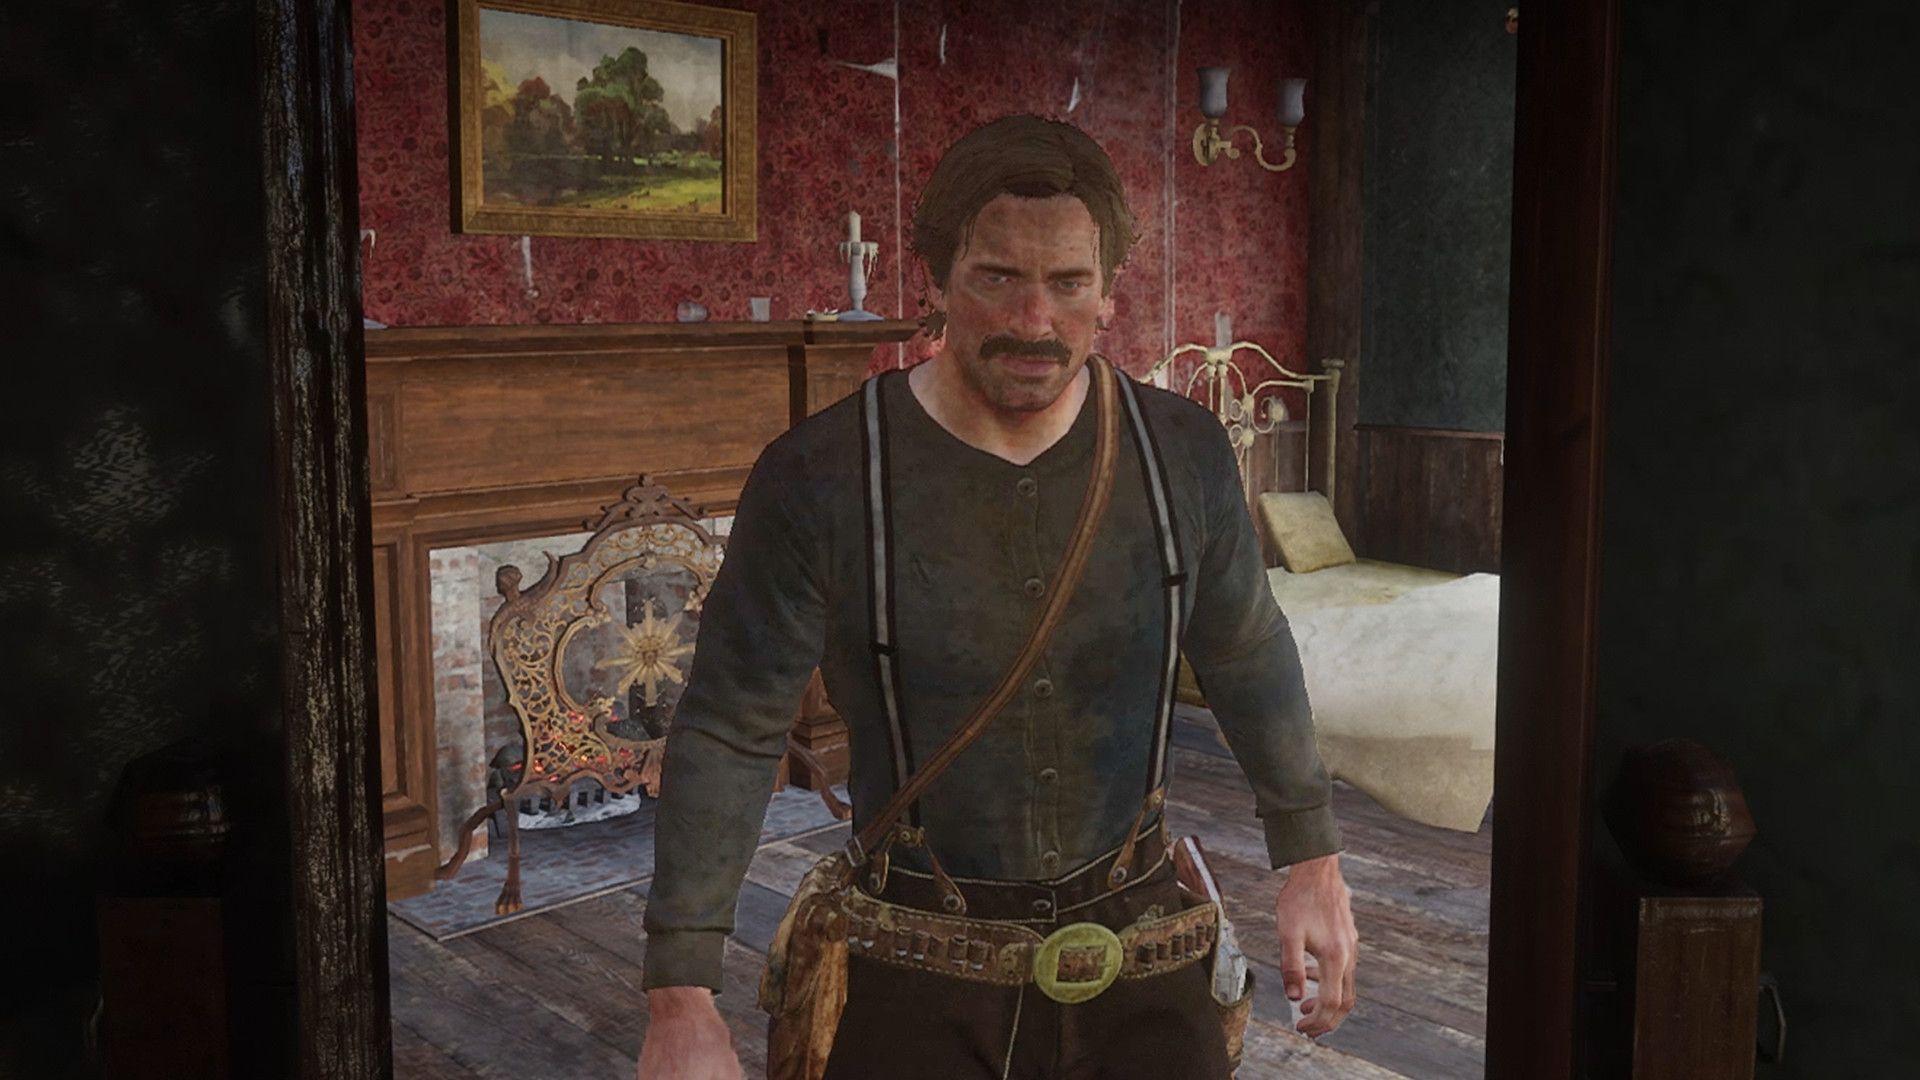 Red Dead Redemption 2's Arthur Morgan does not like the man in